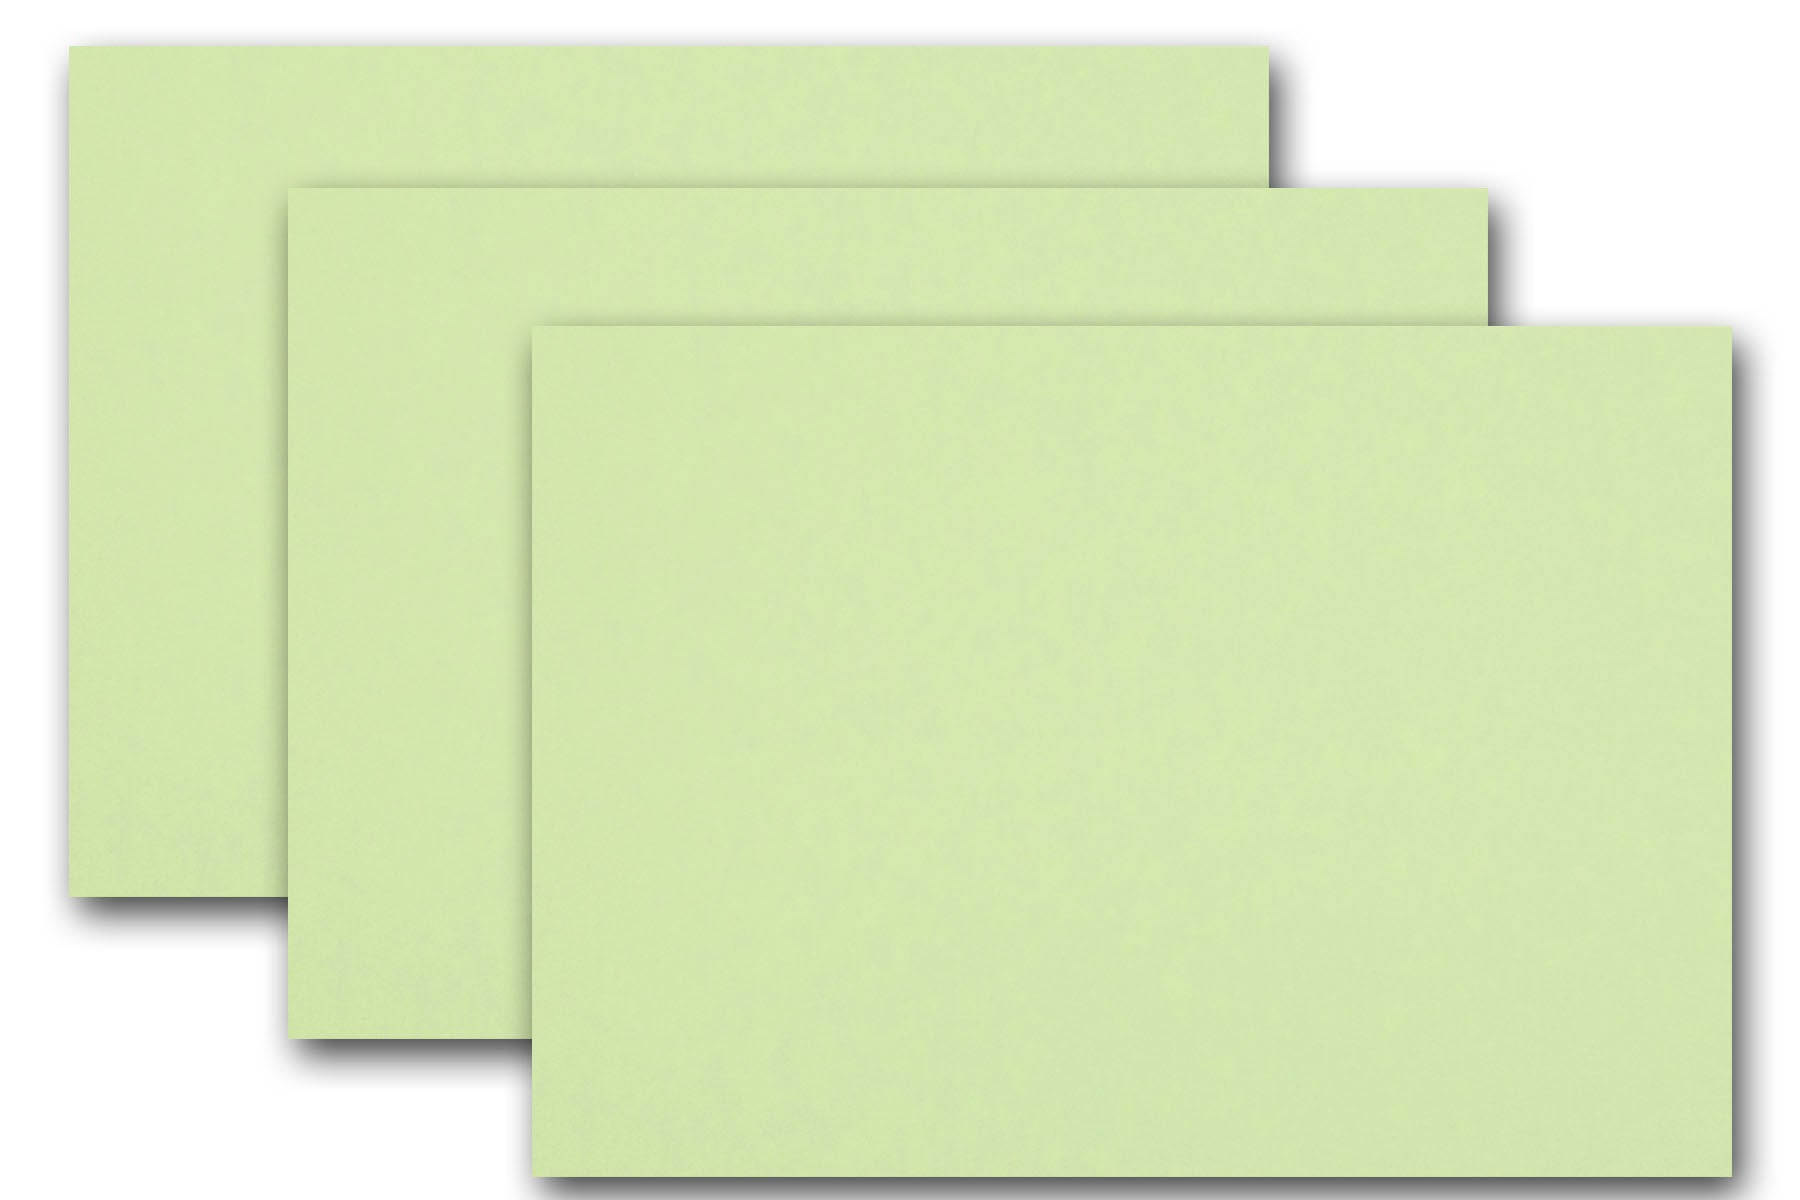 Pop-Tone's Off-White Discount Card Stock for all paper crafting needs -  CutCardStock